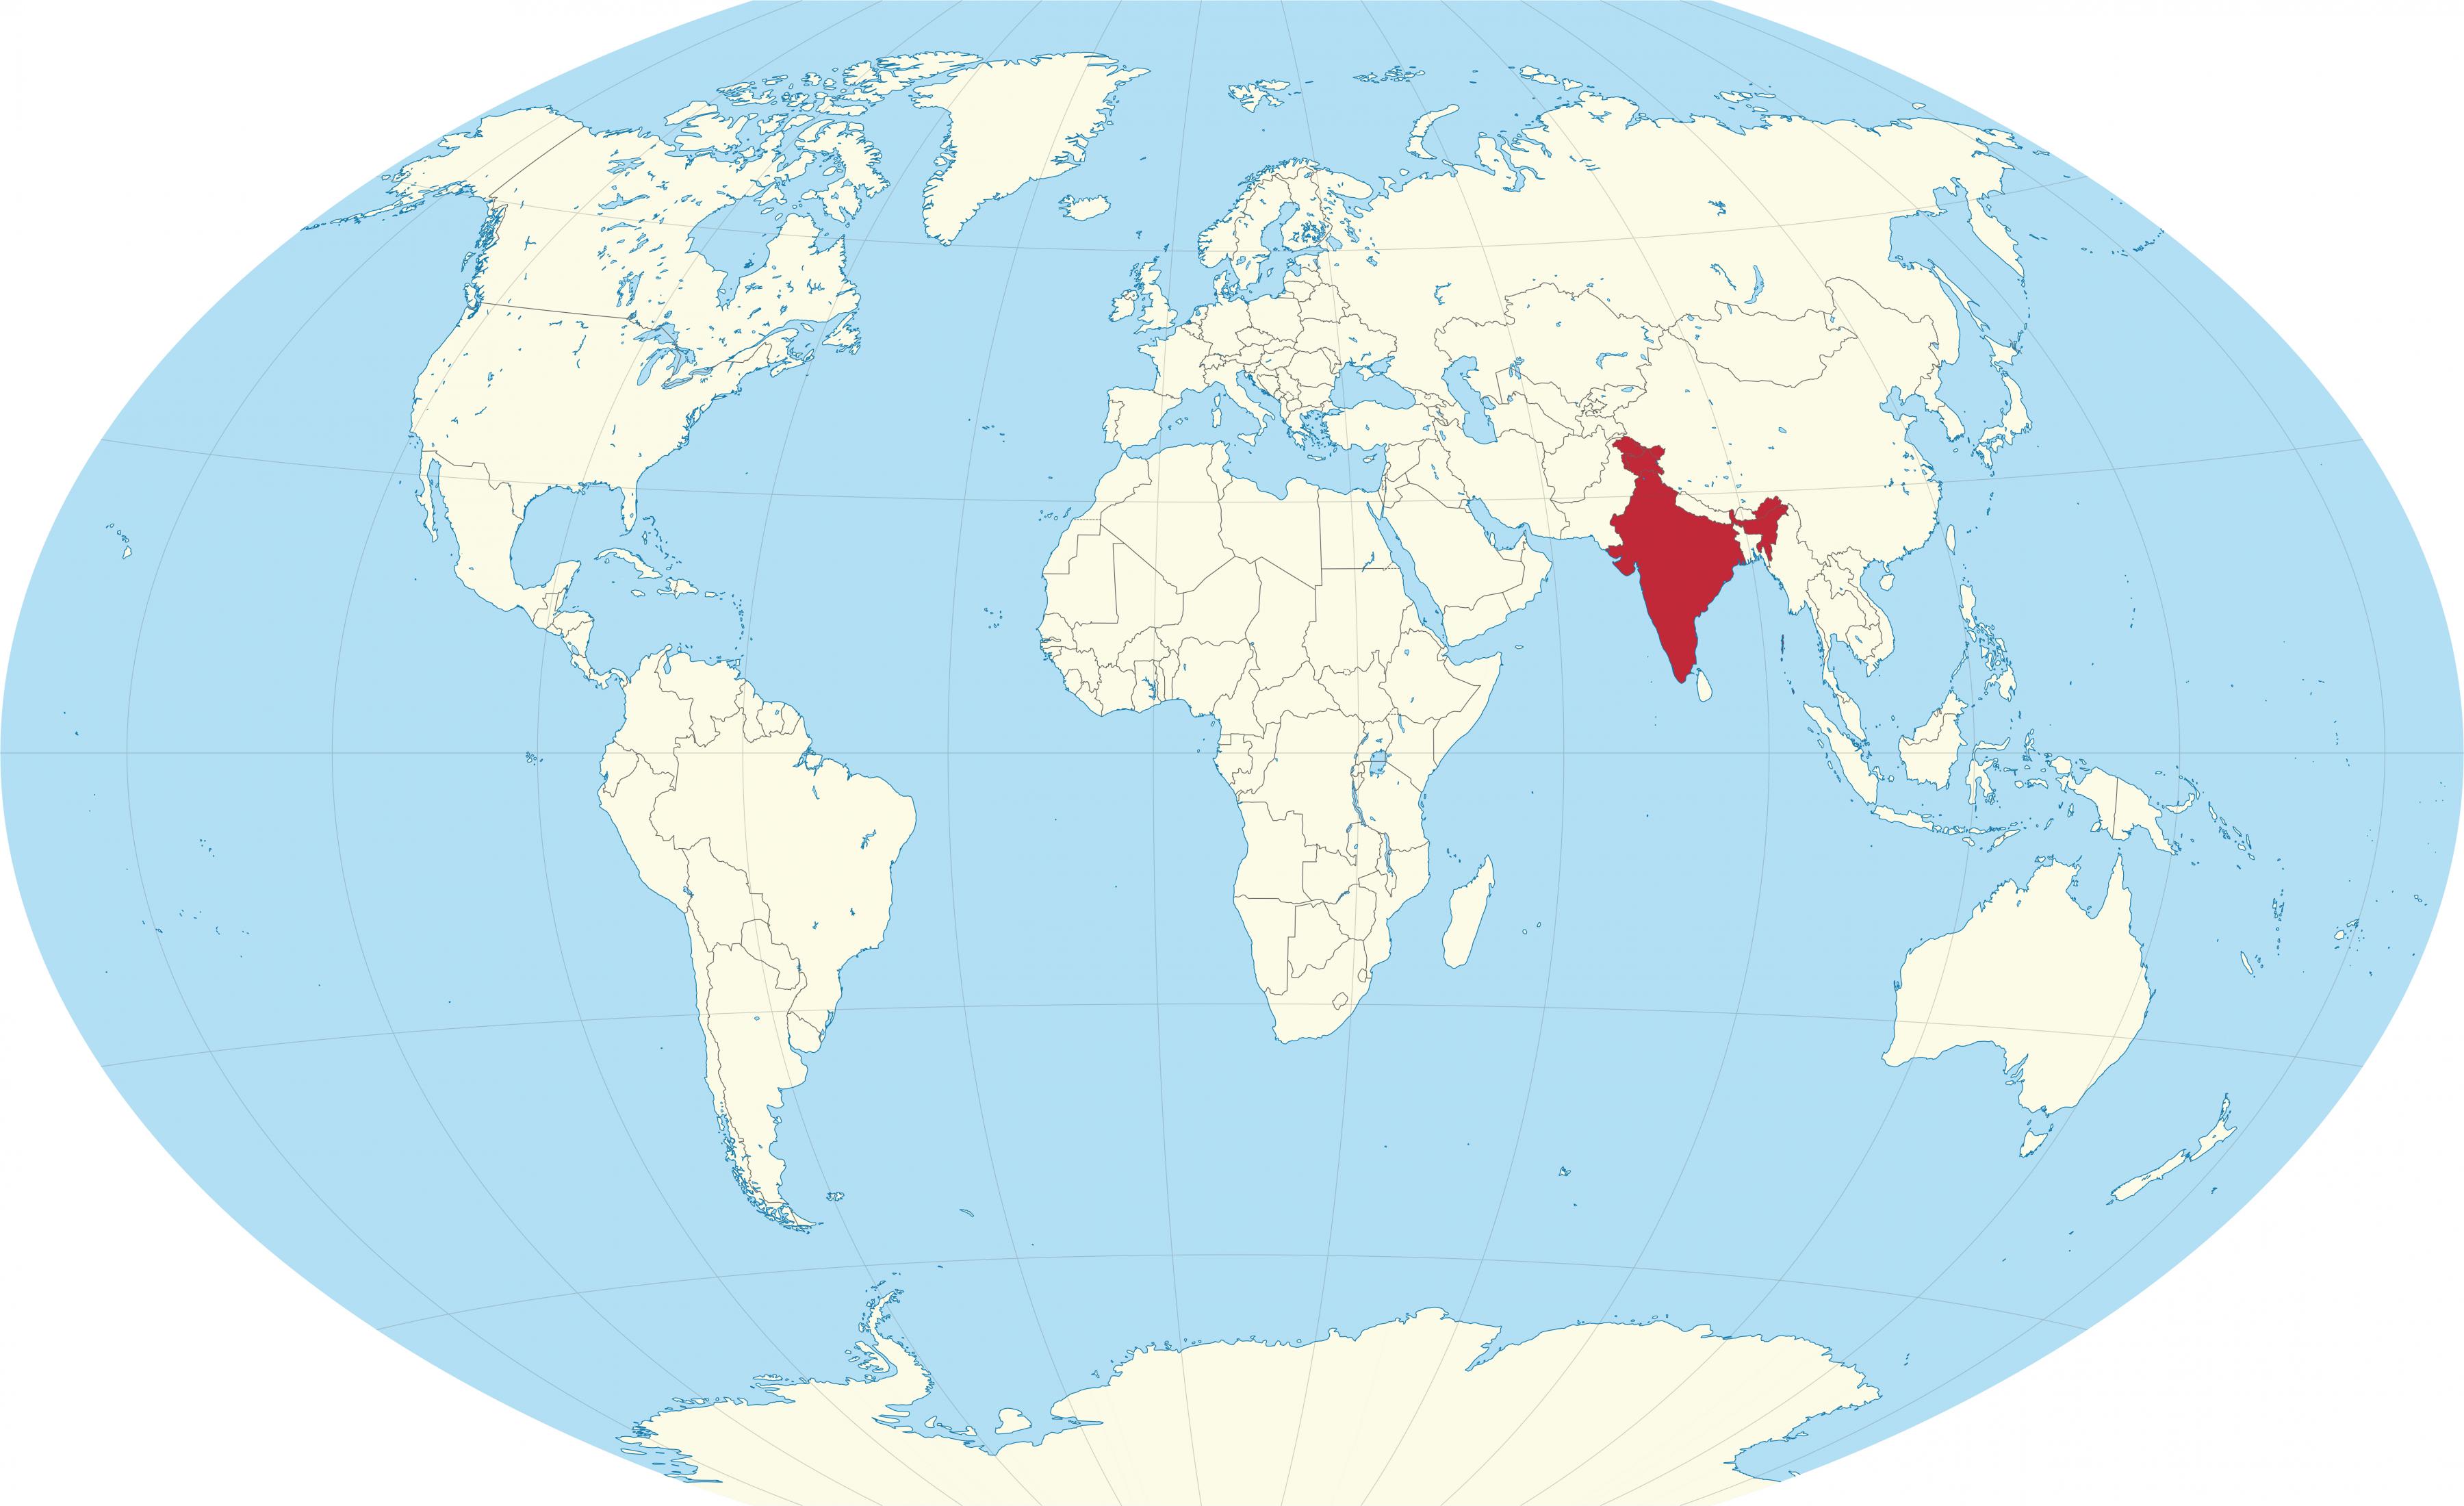 India on world map: surrounding countries and location on Asia map